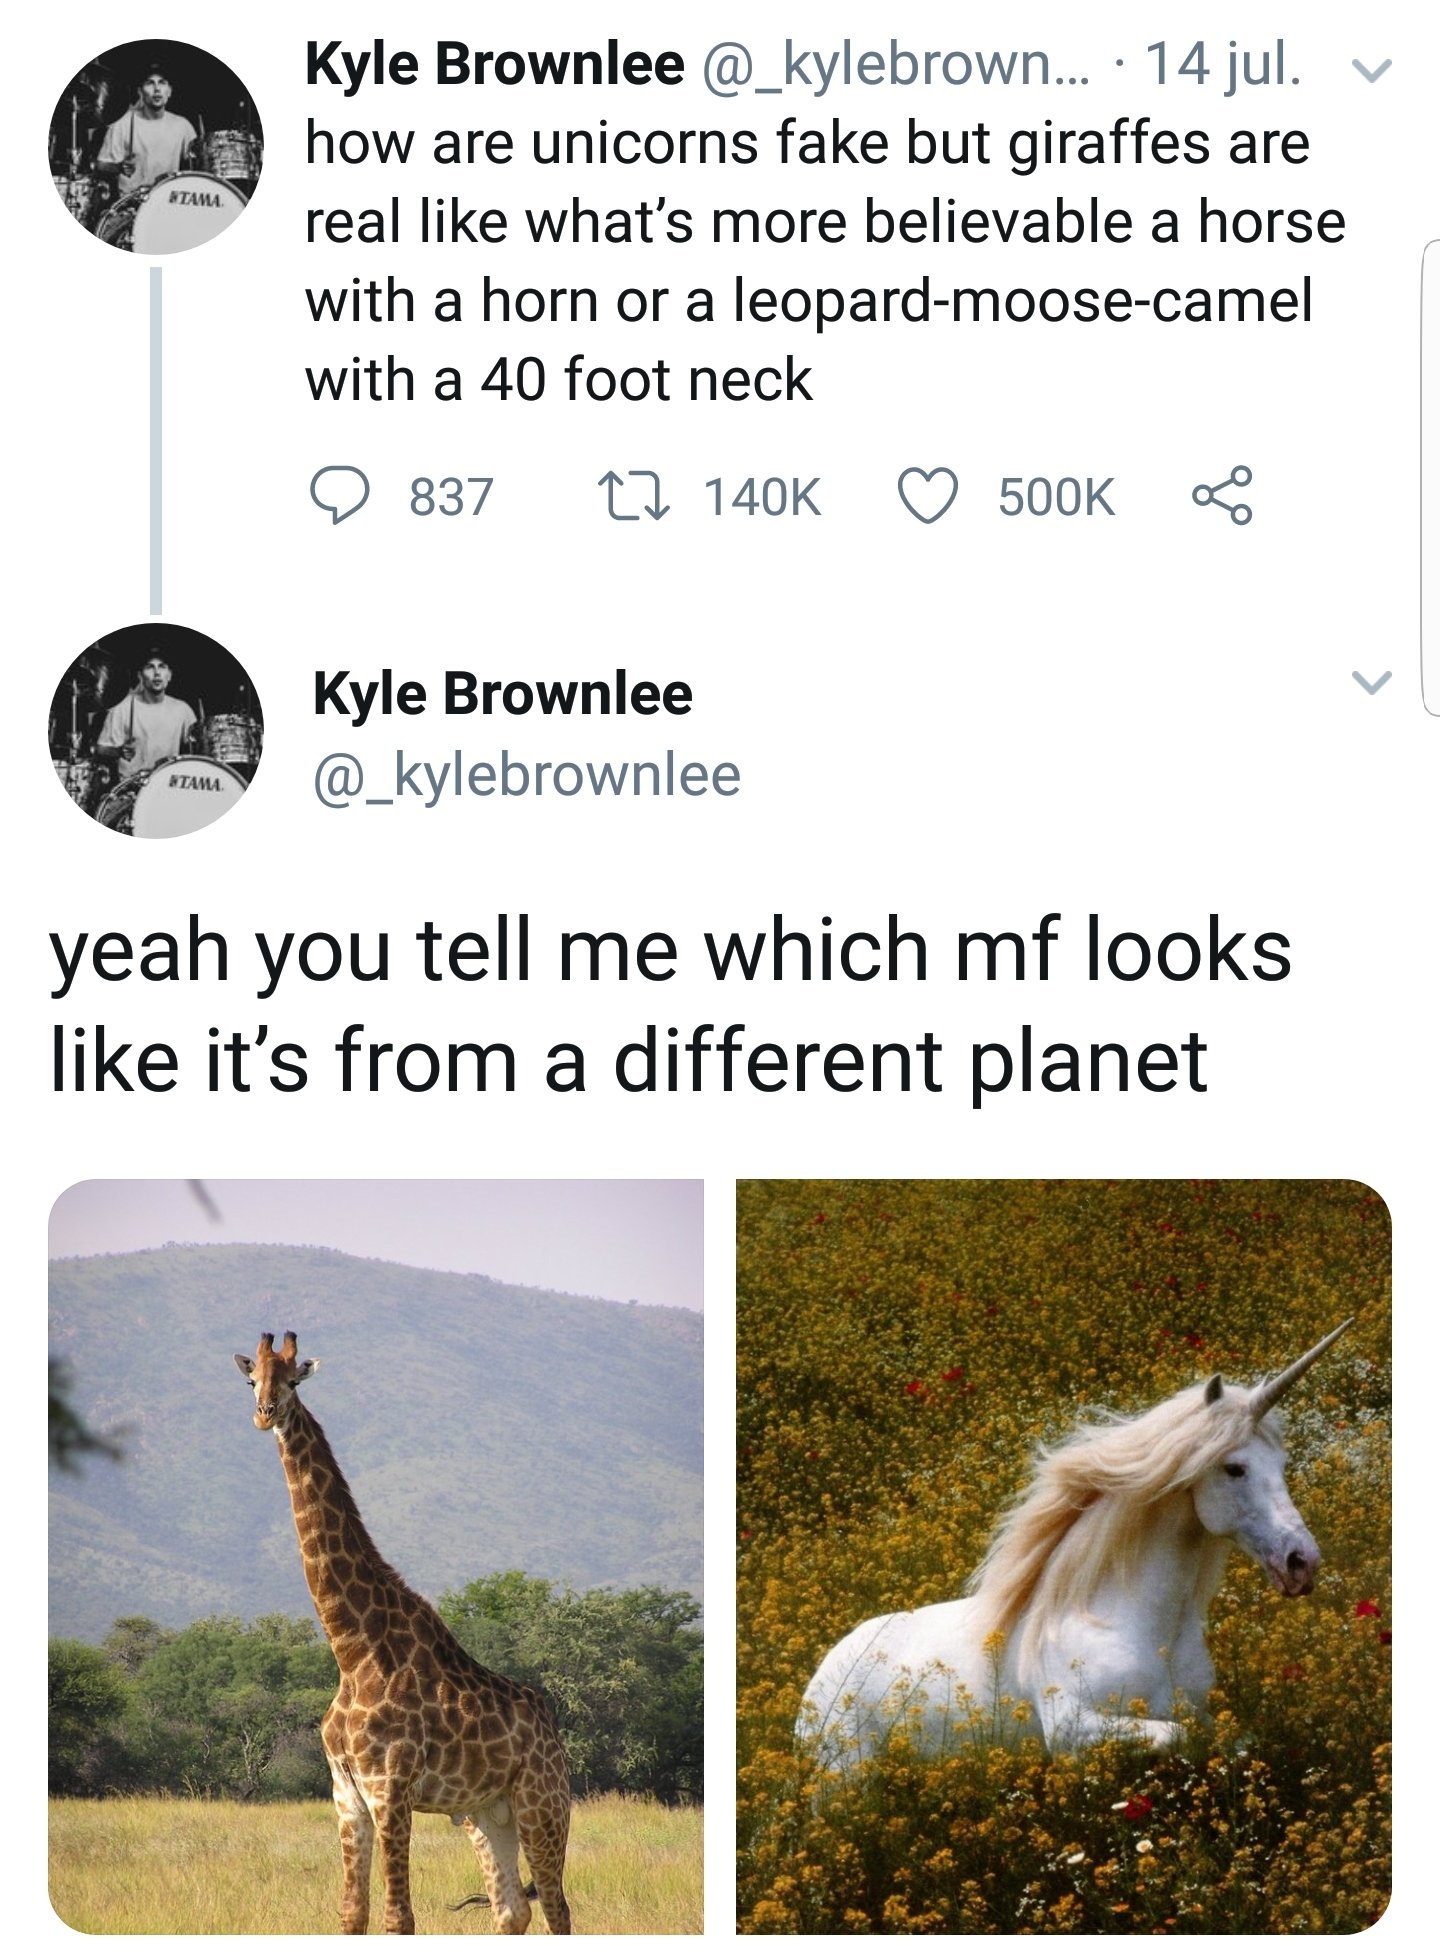 funny memes and pics - leopard moose camel with a 40 foot neck - Kyle Brownlee ... 14 jul. how are unicorns fake but giraffes are real what's more believable a horse with a horn or a leopardmoosecamel with a 40 foot neck Kyle Brownlee Stama yeah you tell 